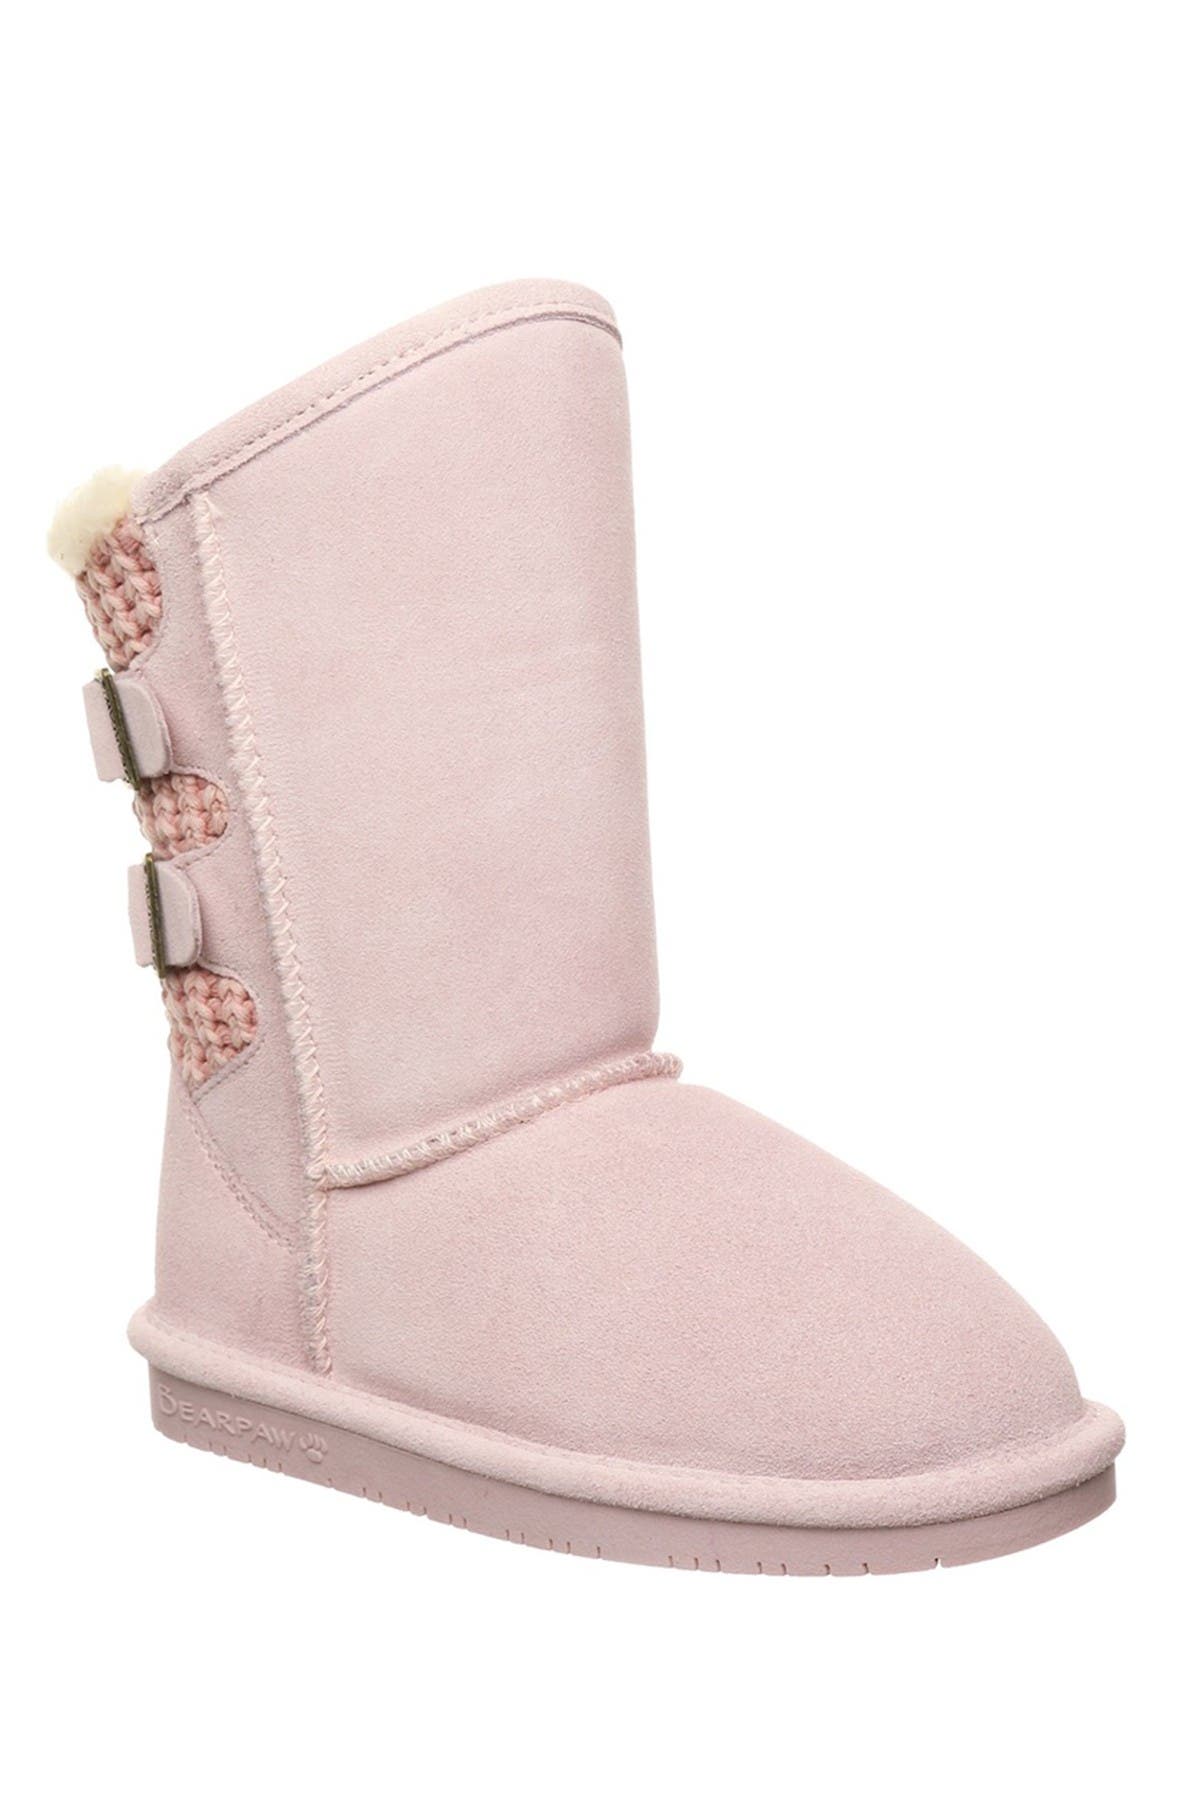 bearpaw phylly youth